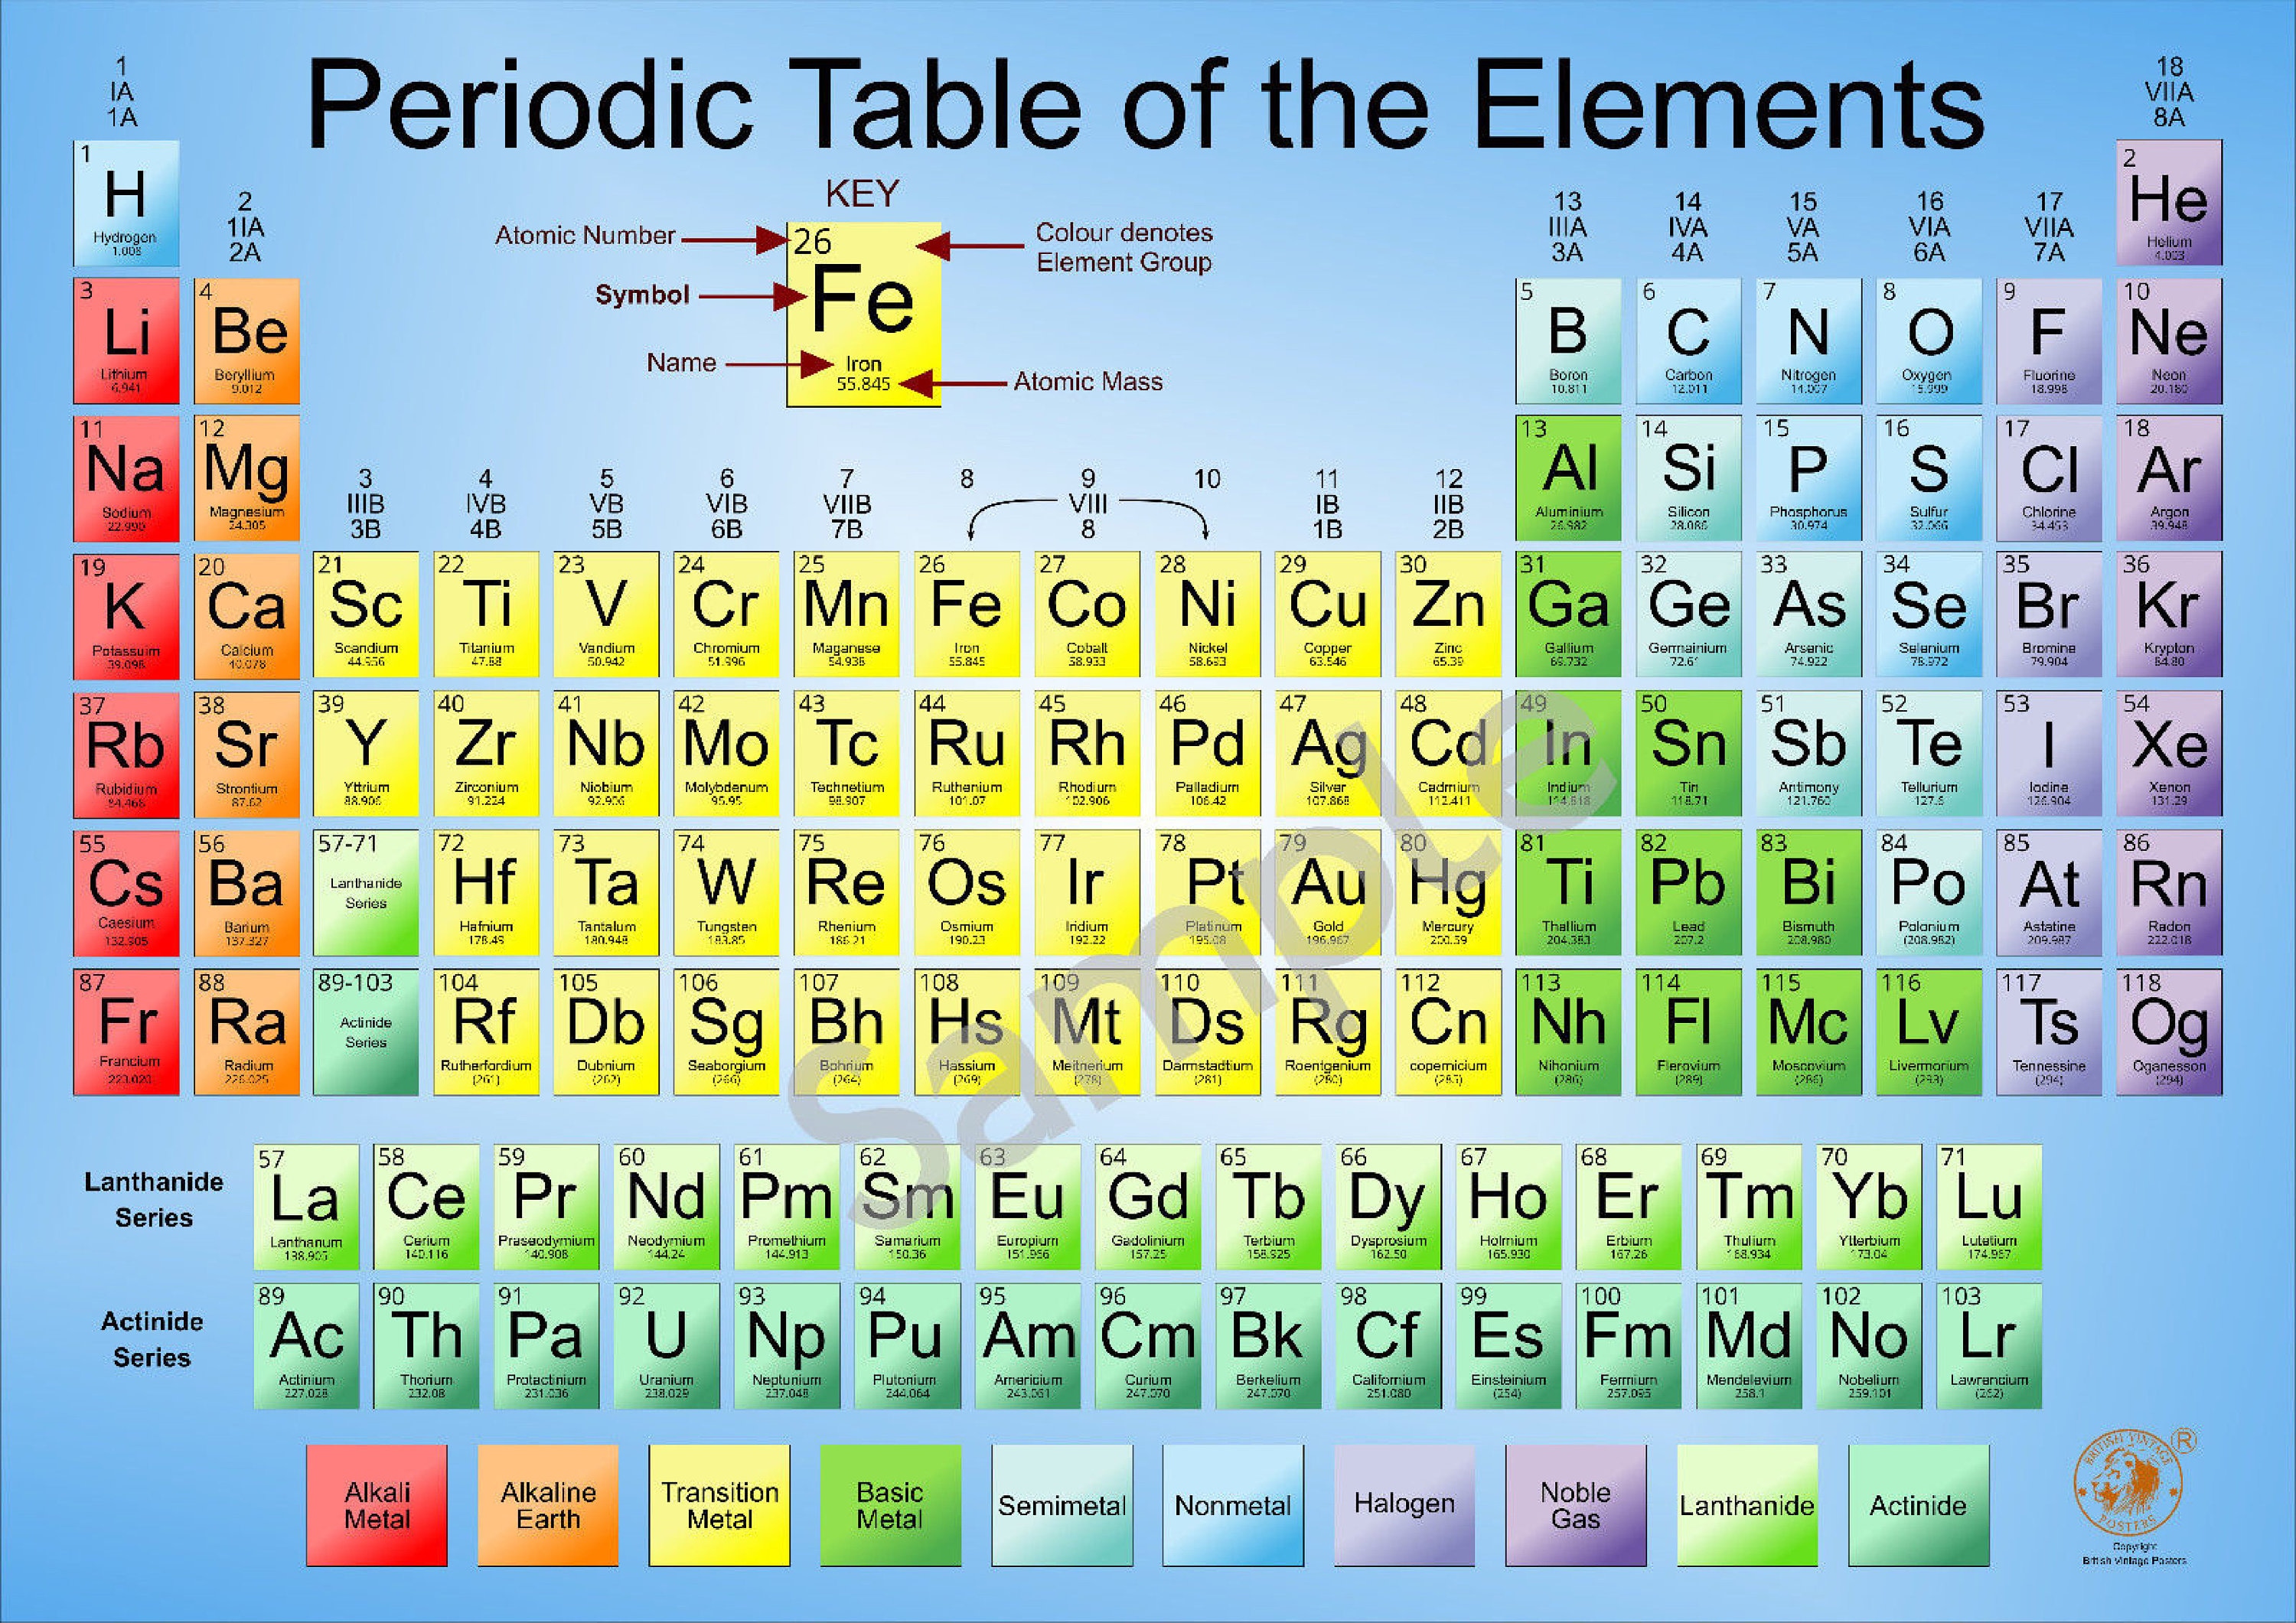 Th химический элемент. Table of Chemical elements. Periodic Table of elements. Periodic Table Chemistry. Mendeleev Table of elements.